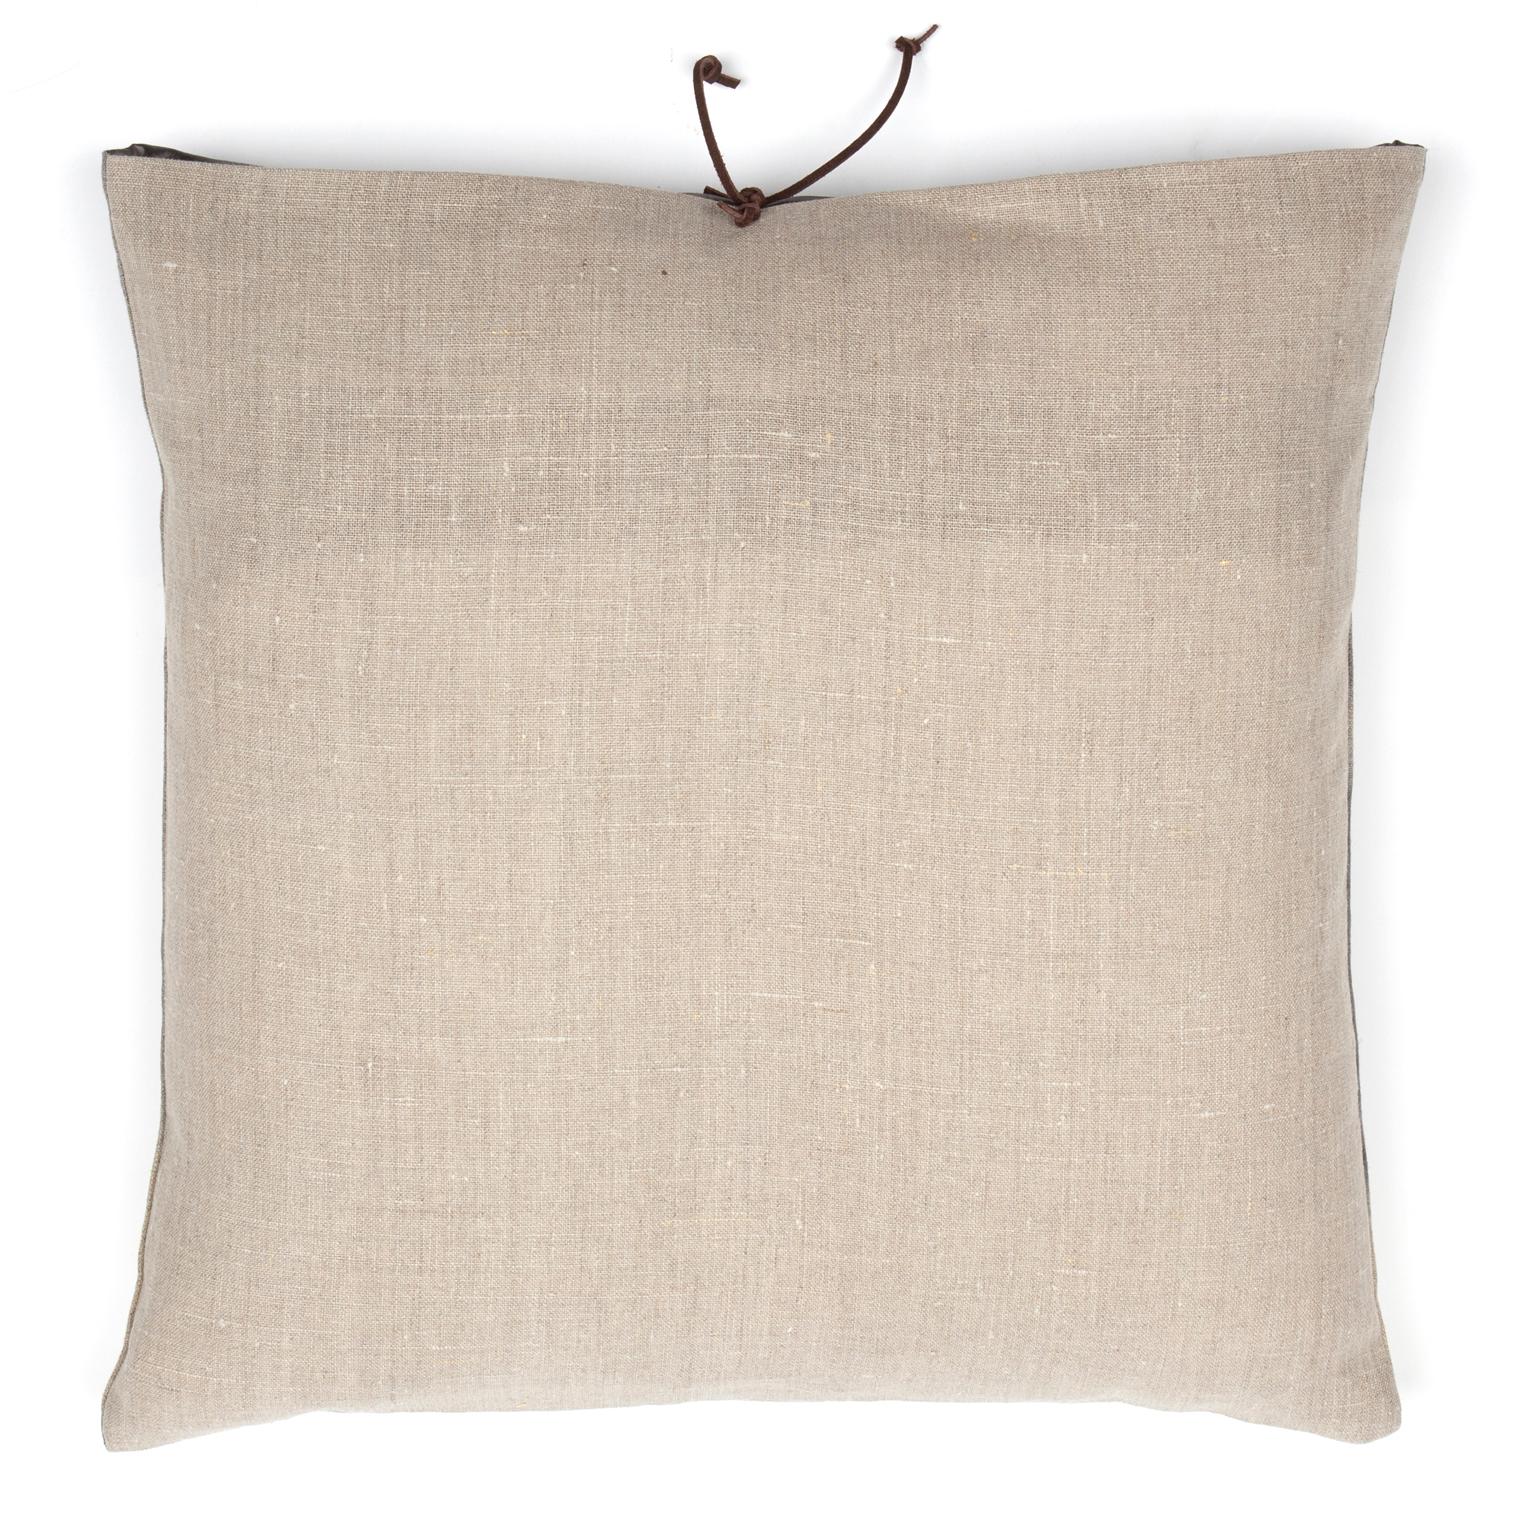 A luxury handmade decorative throw pillow made of printed Belgian linen, great for adding comfort and casual, laid-back style to a contemporary living room, bedroom or lounge. Belgian
linen is high quality, durable, naturally made fabric from the